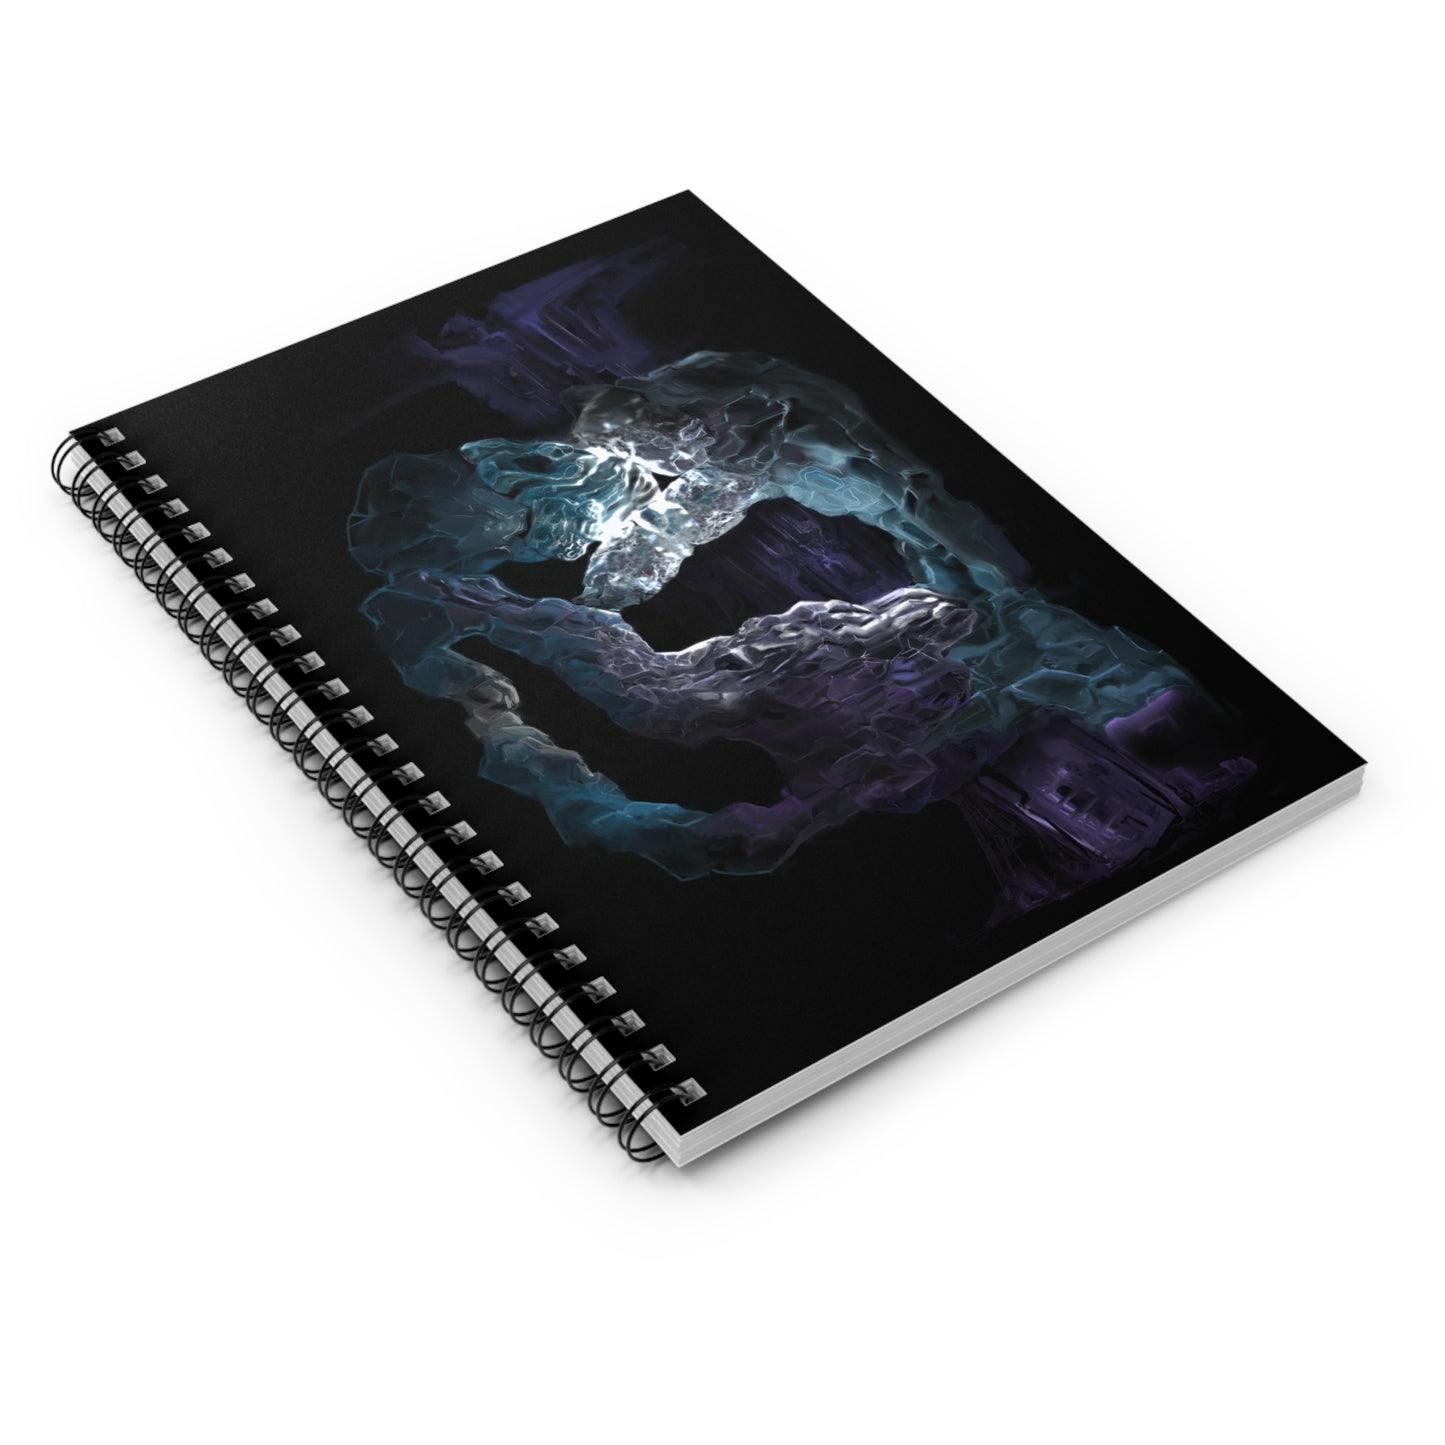 Anomalous Presence Spiral Notebook - Ruled Line